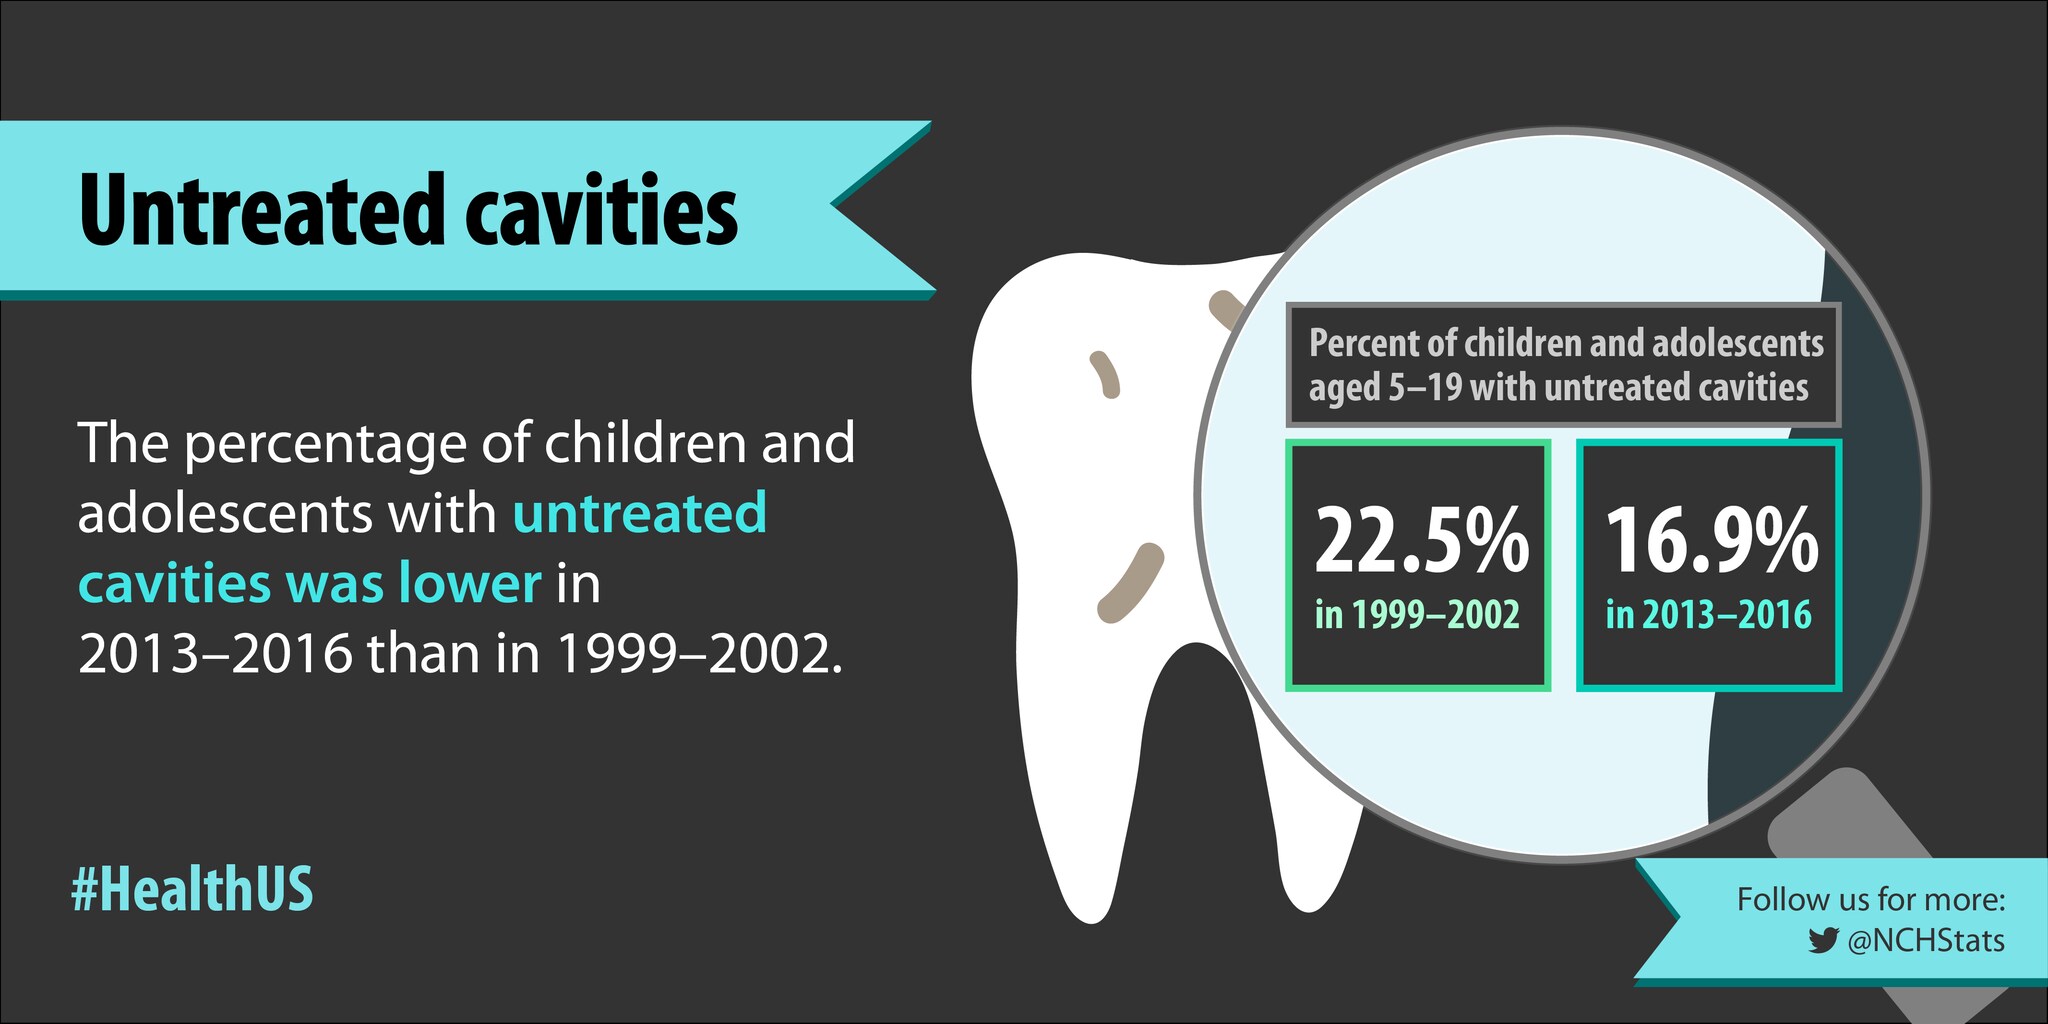 The percentage of children and adolescents with untreated cavities was lower in 2013-2016 than in 1999-2002.